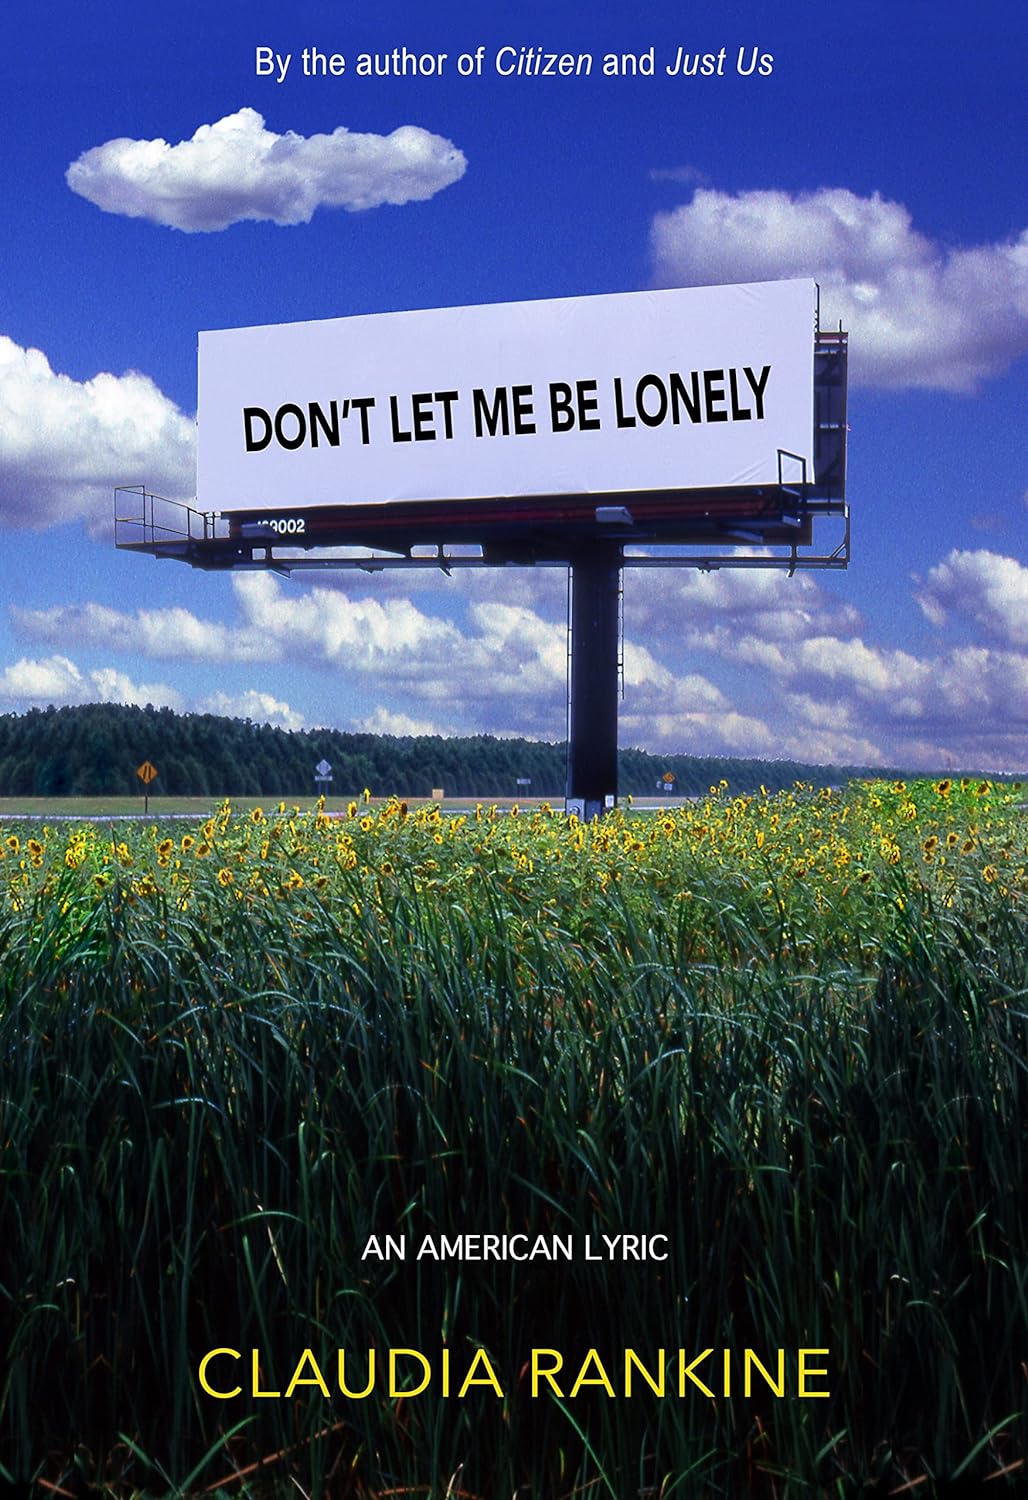 One of our recommended books is Don't Let Me Be Lonely by Claudia Rankine